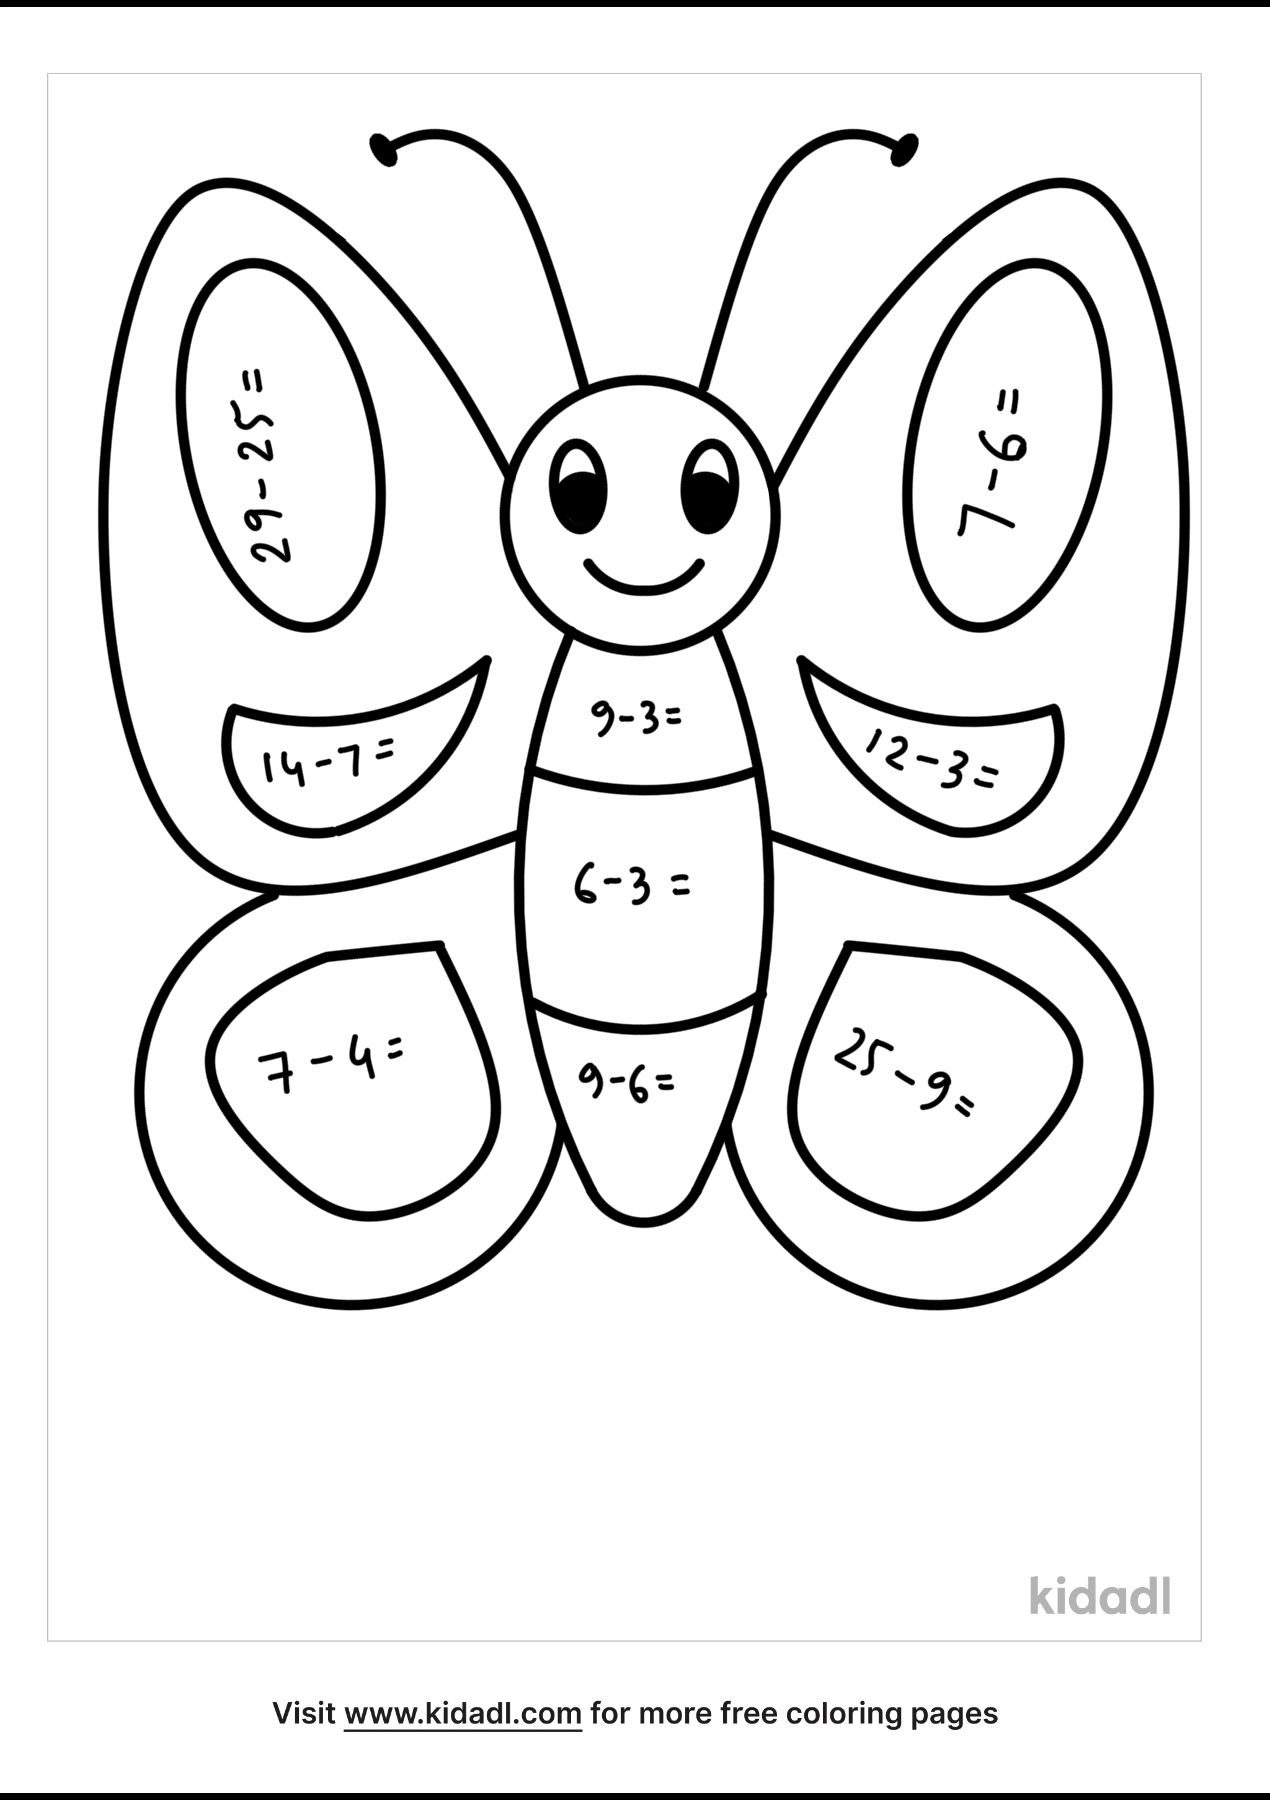 Subtraction Coloring Pages | Free School-and-subjects Coloring Pages |  Kidadl